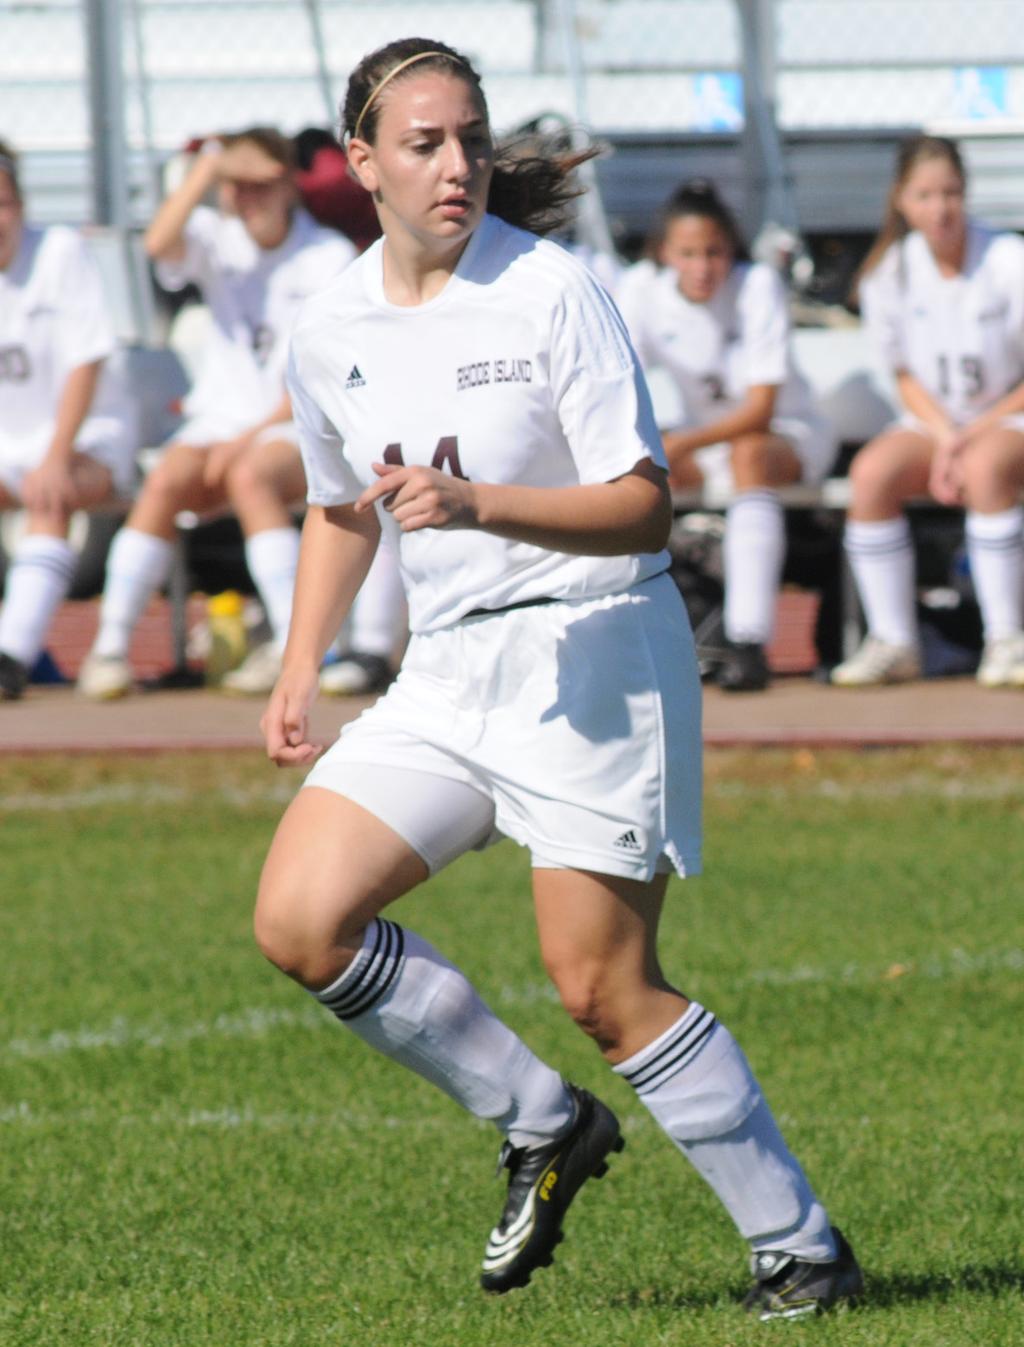 Freshman Year (2007): Earned All-Region XXI honors while at the Community College of Rhode Island.